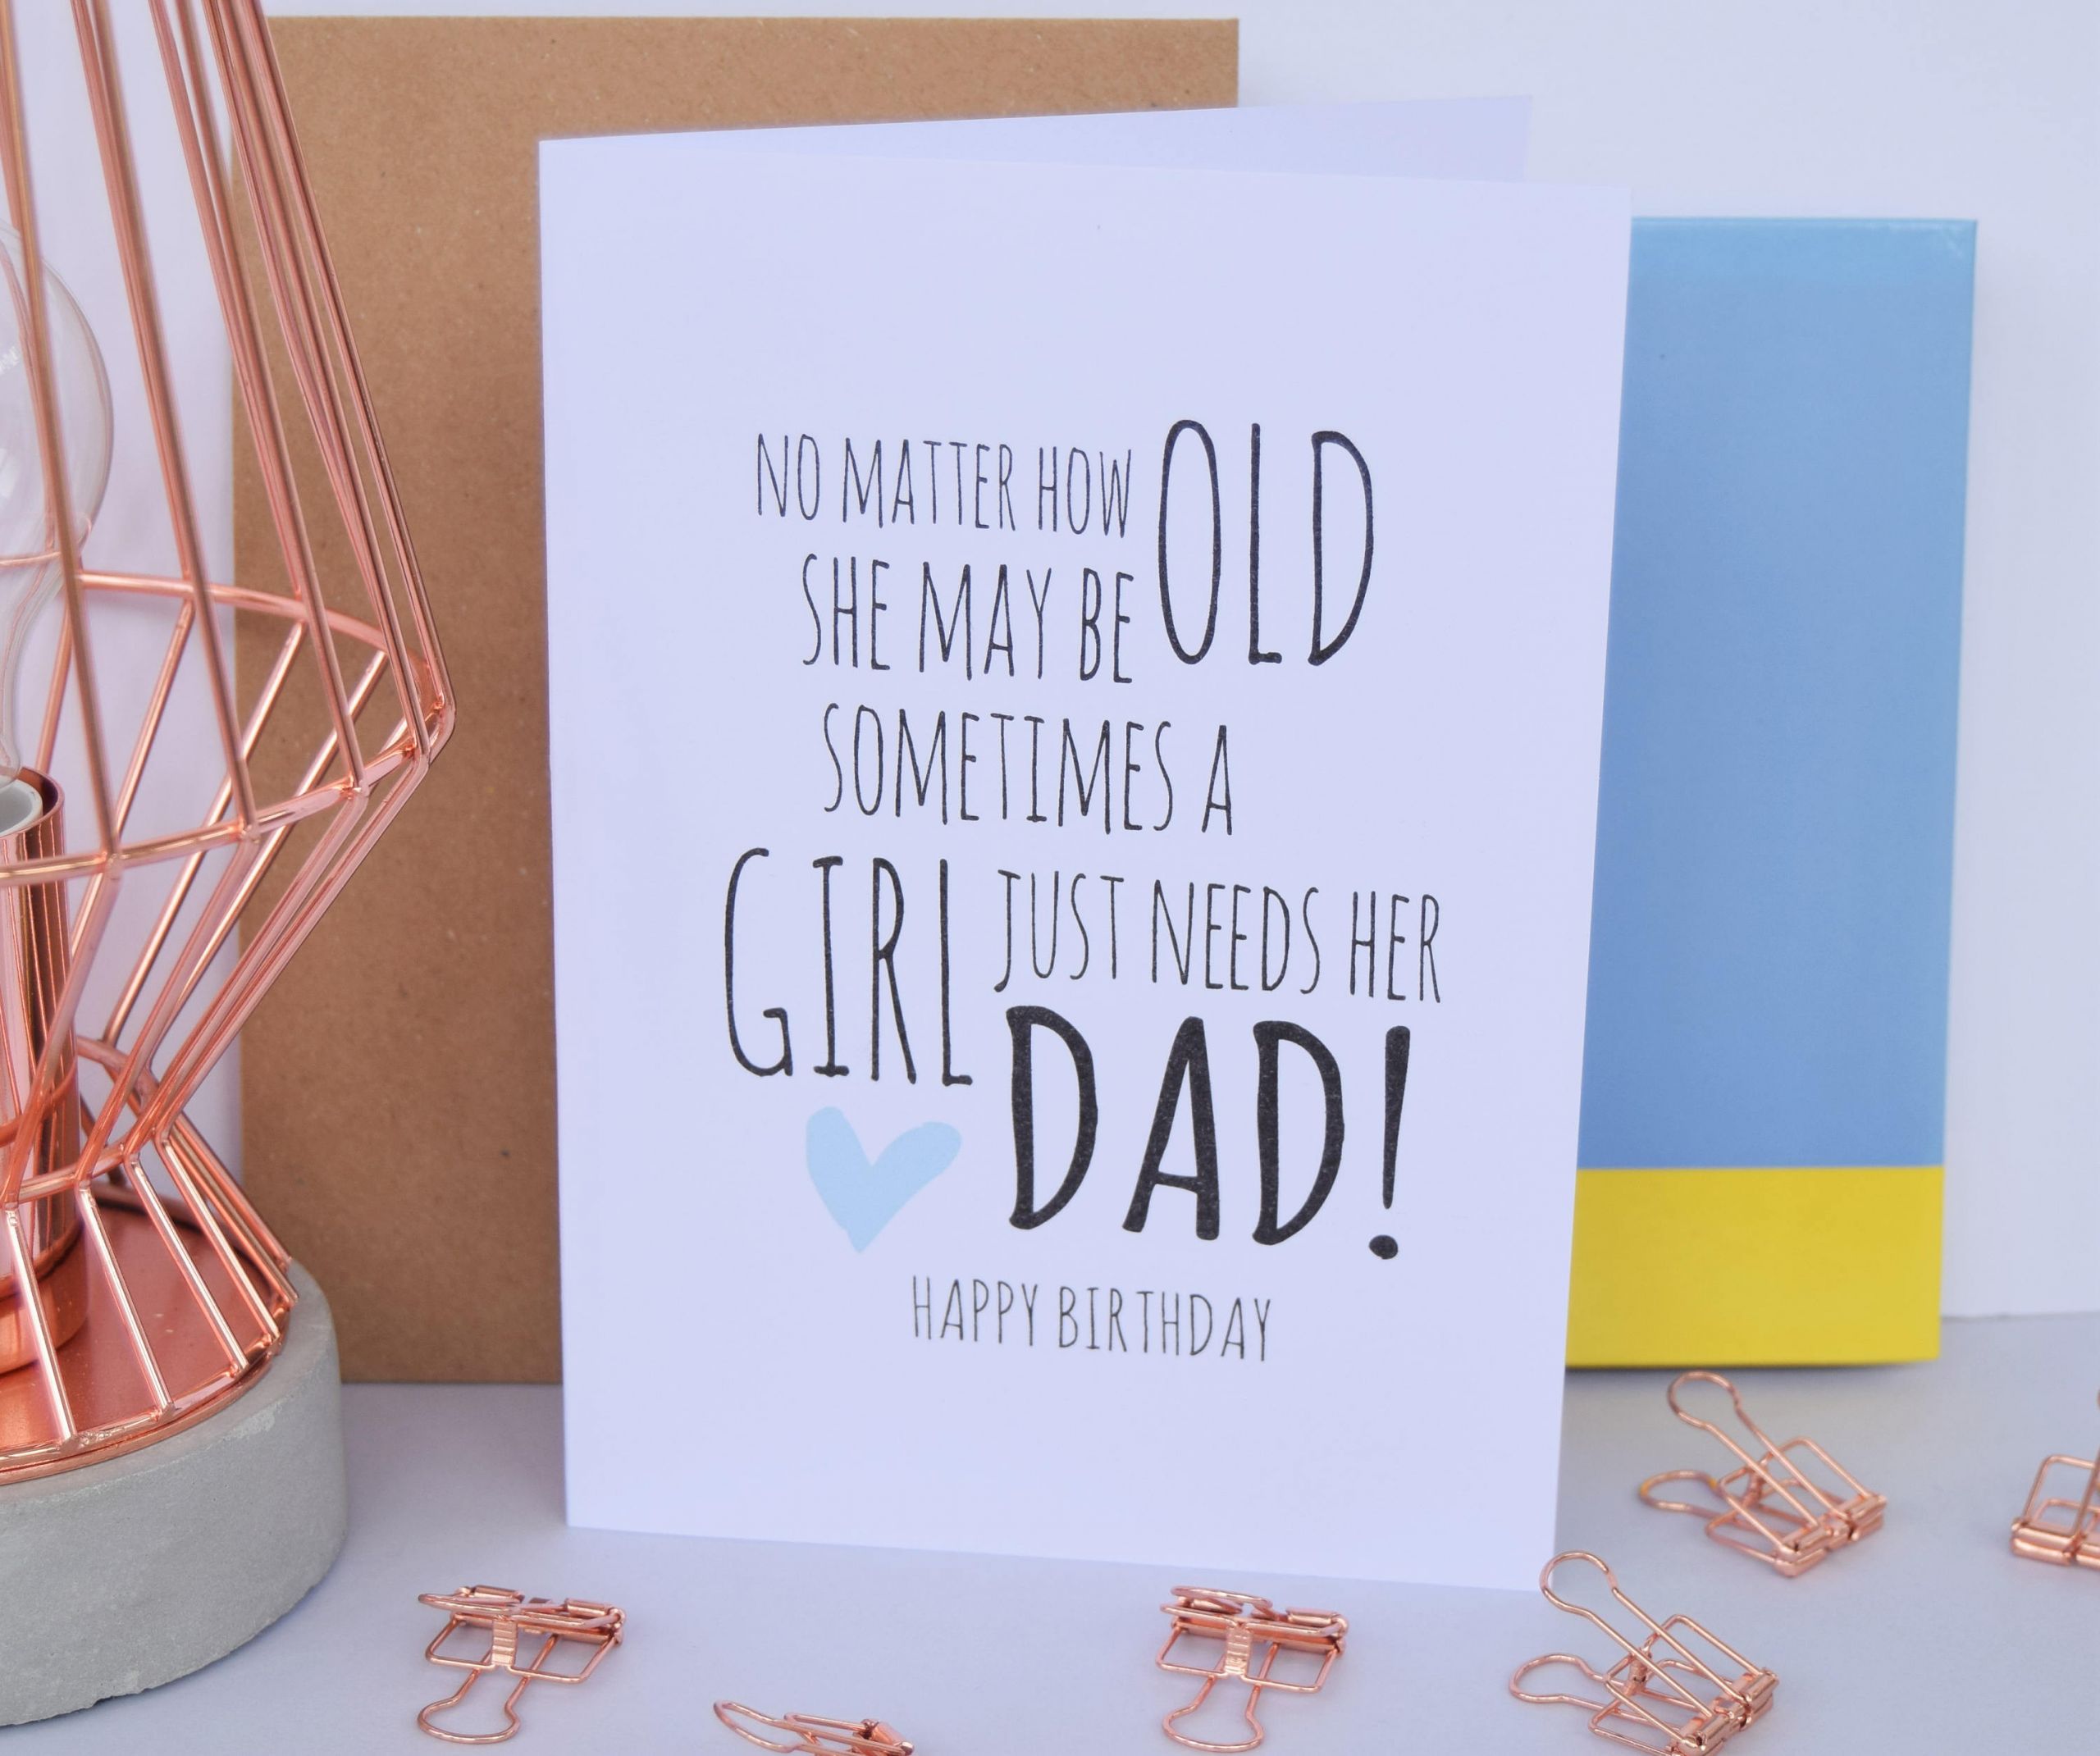 Birthday Cards For Dad
 Dad Birthday Card A Girl Just Needs Her Dad Daughter Dad